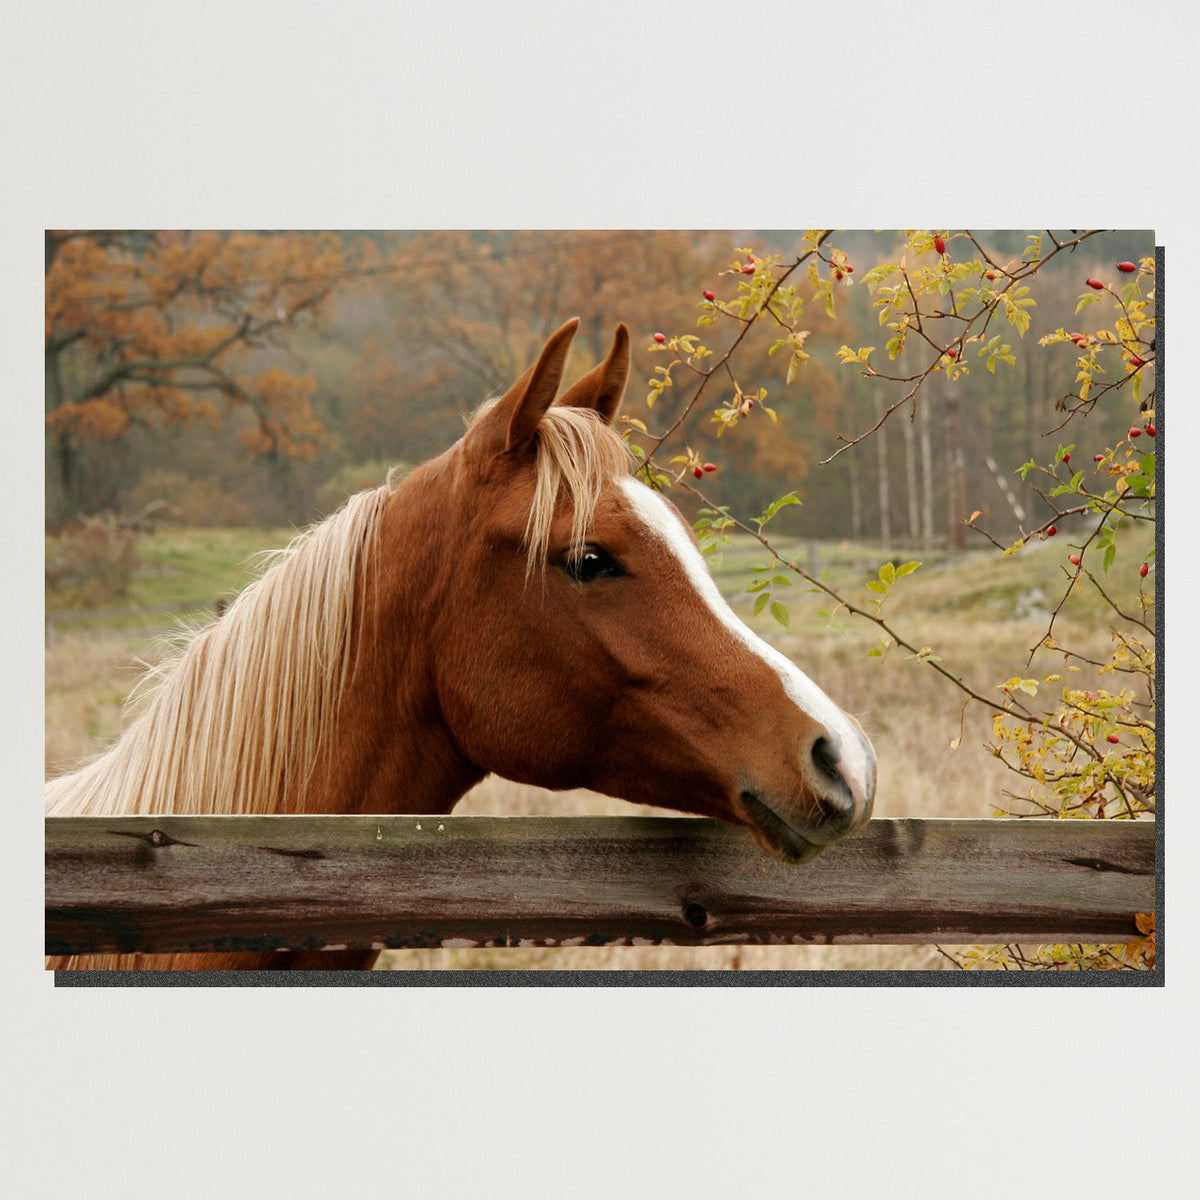 https://cdn.shopify.com/s/files/1/0387/9986/8044/products/CountryHorseCanvasArtprintStretched-Plain.jpg